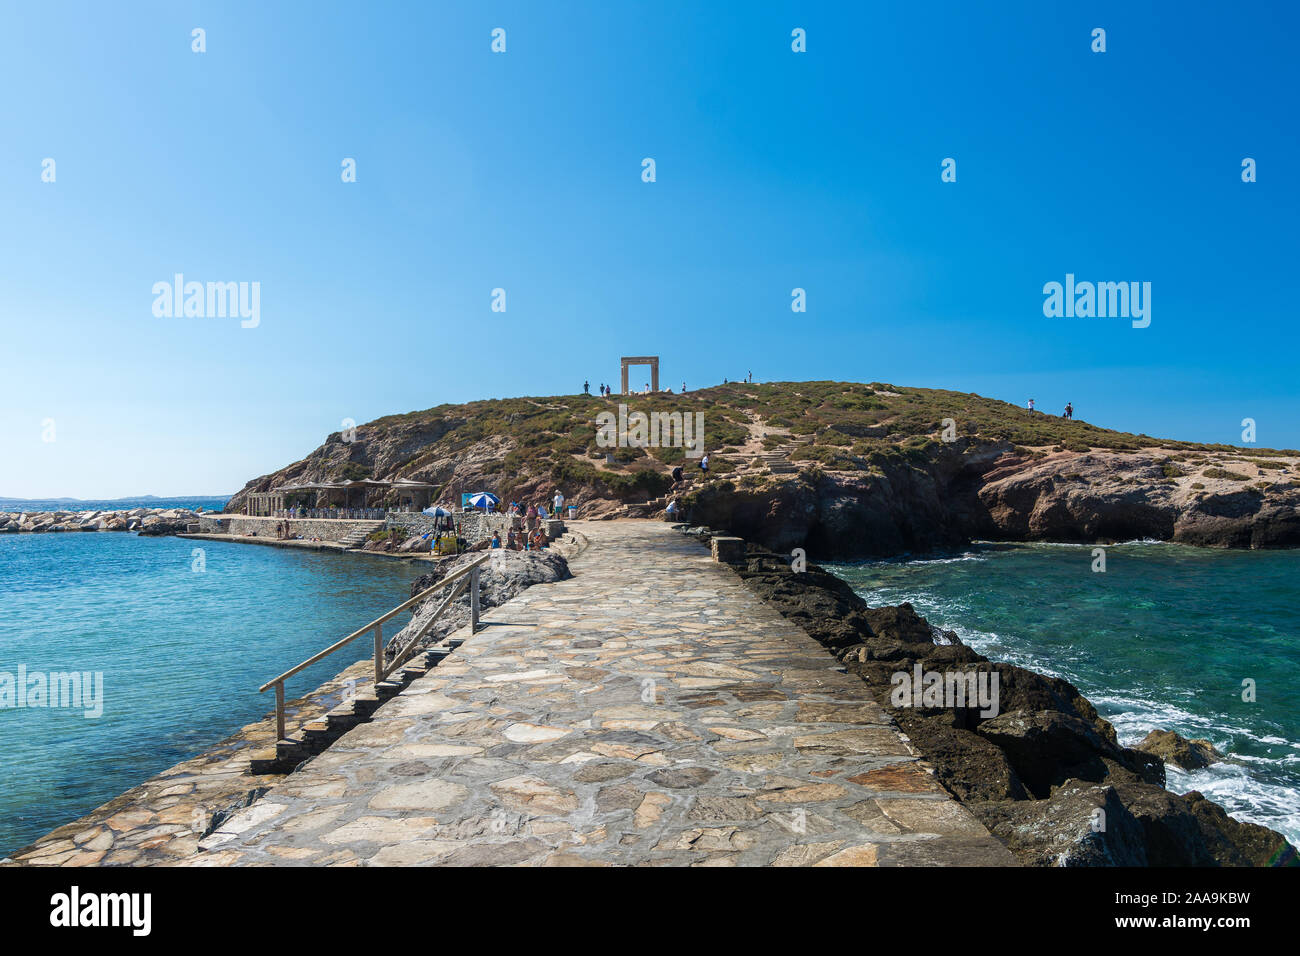 Naxos, Greece - July 12, 2019: View of Naxos capital Chora from the portara promenade area on a sunny afternoon Stock Photo